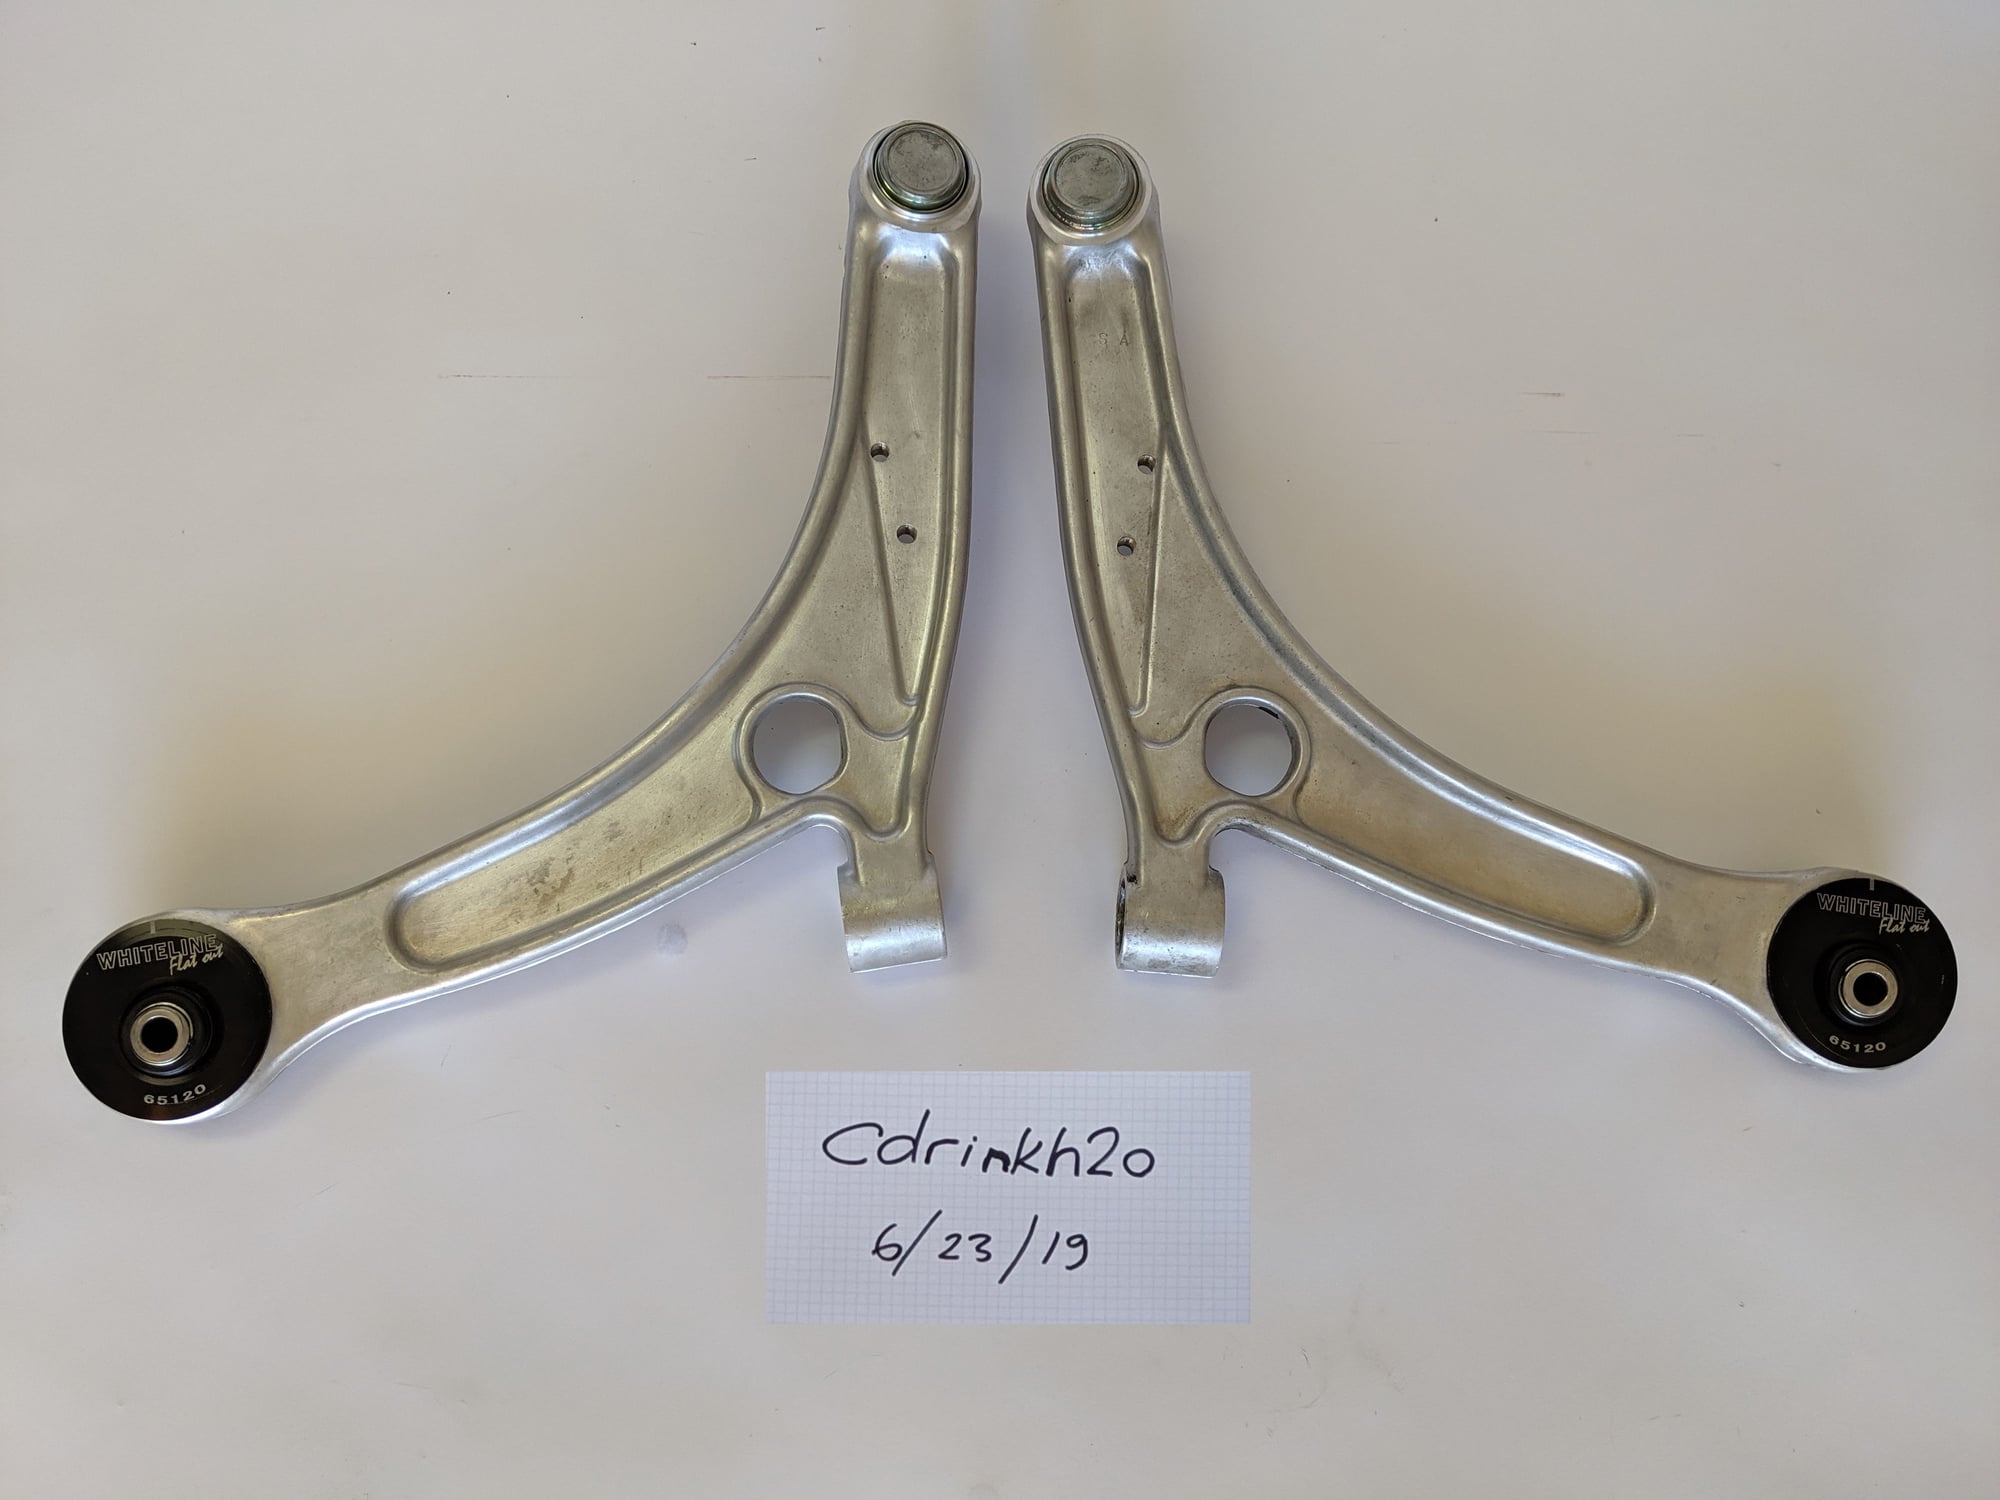 Steering/Suspension - Front LCA Lower Control Arms LH & RH with Whiteline Ball Joints - Used - 2003 to 2006 Mitsubishi Lancer Evolution - Moraga, CA 94556, United States